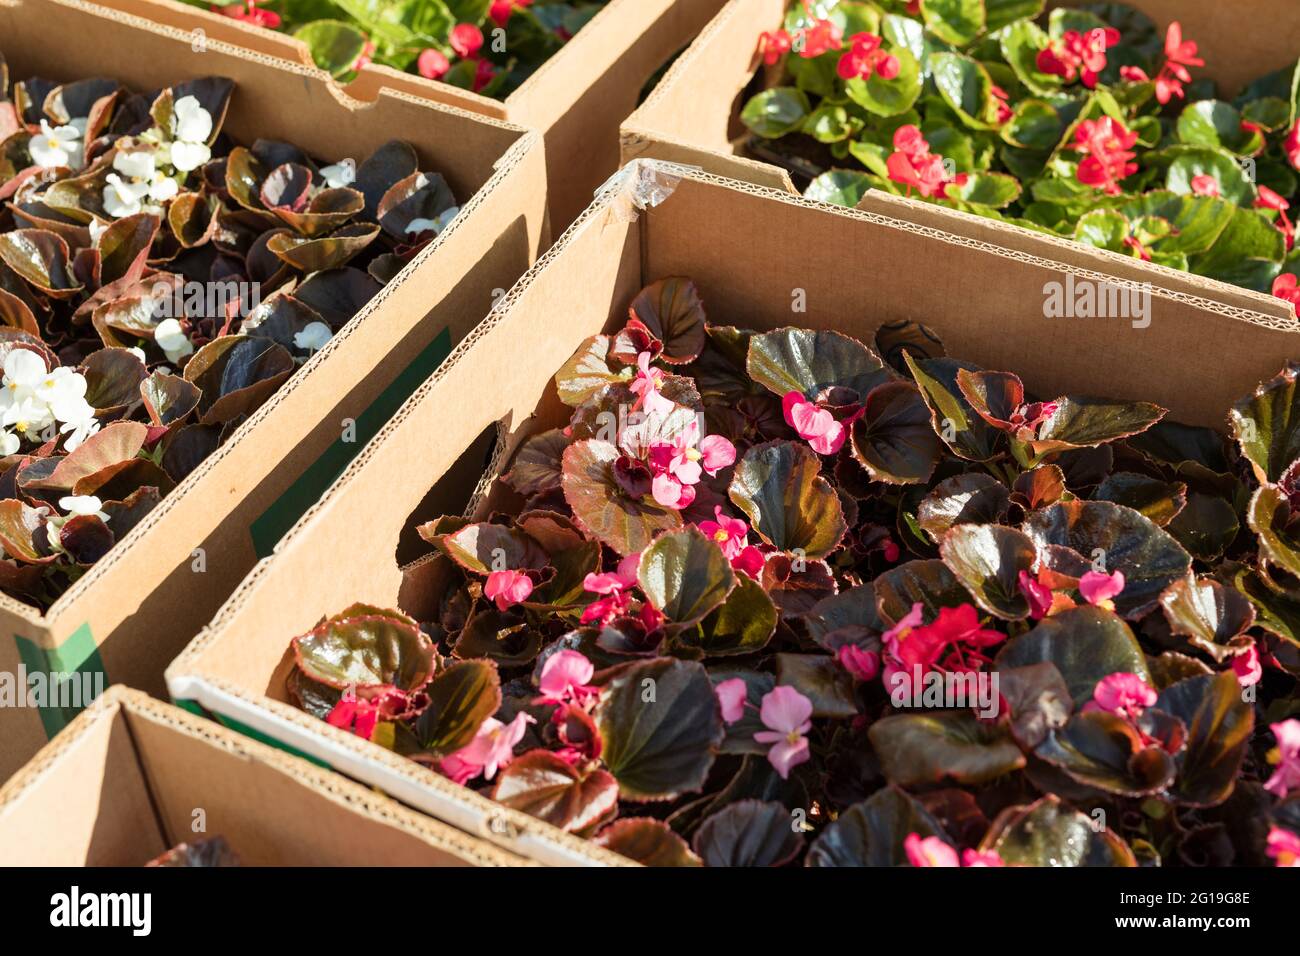 Wax begonia plants put in boxes ready to sell, grown in a nursery Stock Photo